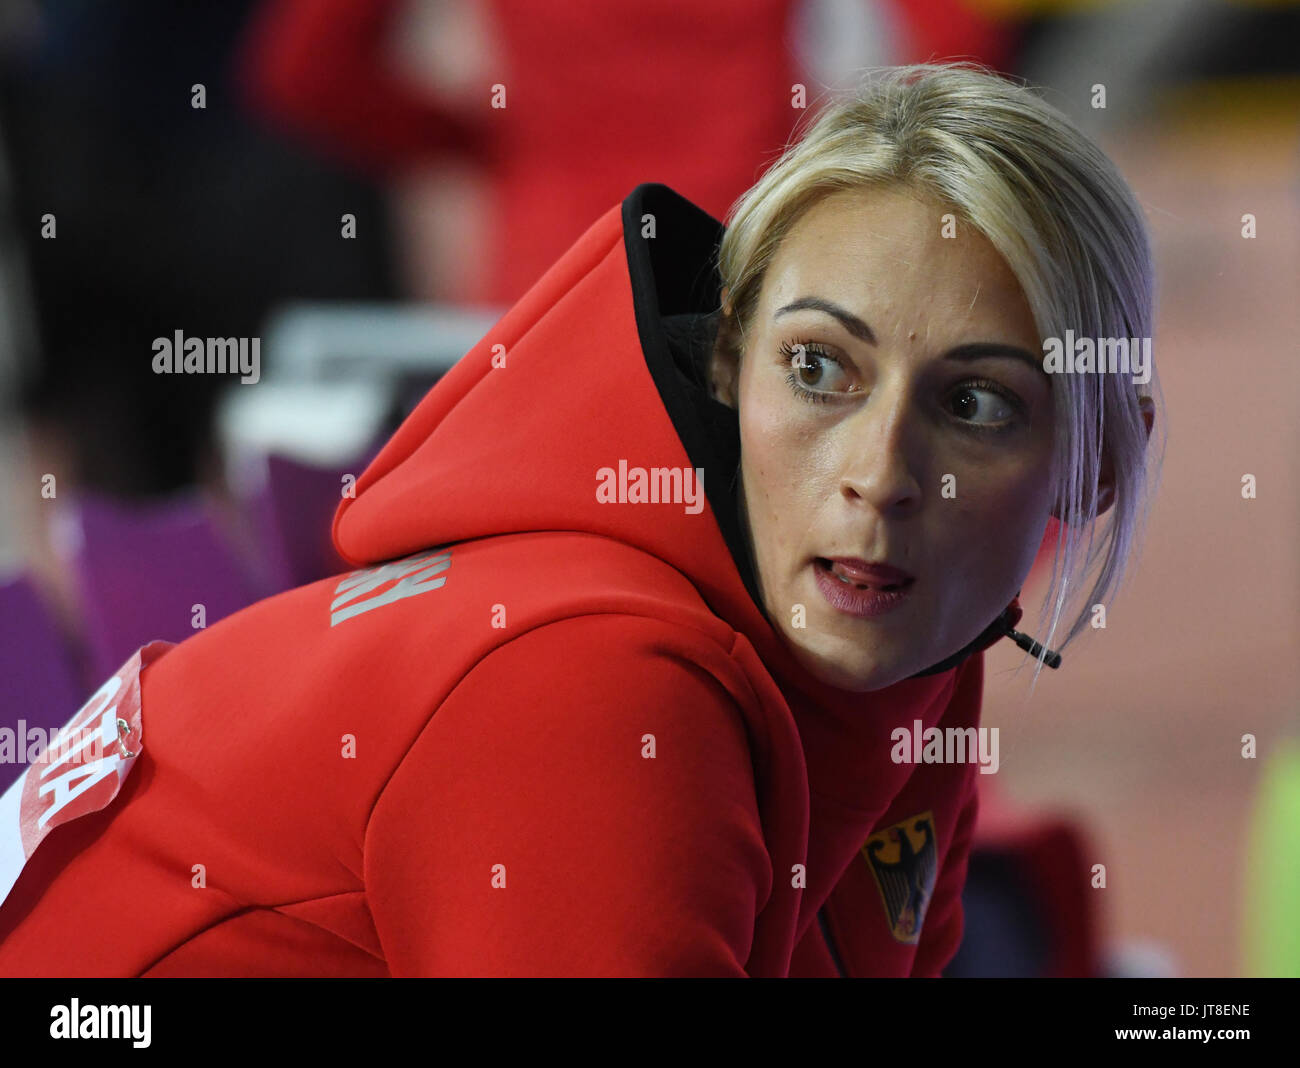 London, UK. 7th Aug, 2017. German athlete Kristin Gierisch during the women's triple jump event at the IAAF London 2017 World Athletics Championships in London, United Kingdom, 7 August 2017. Photo: Bernd Thissen/dpa/Alamy Live News Stock Photo